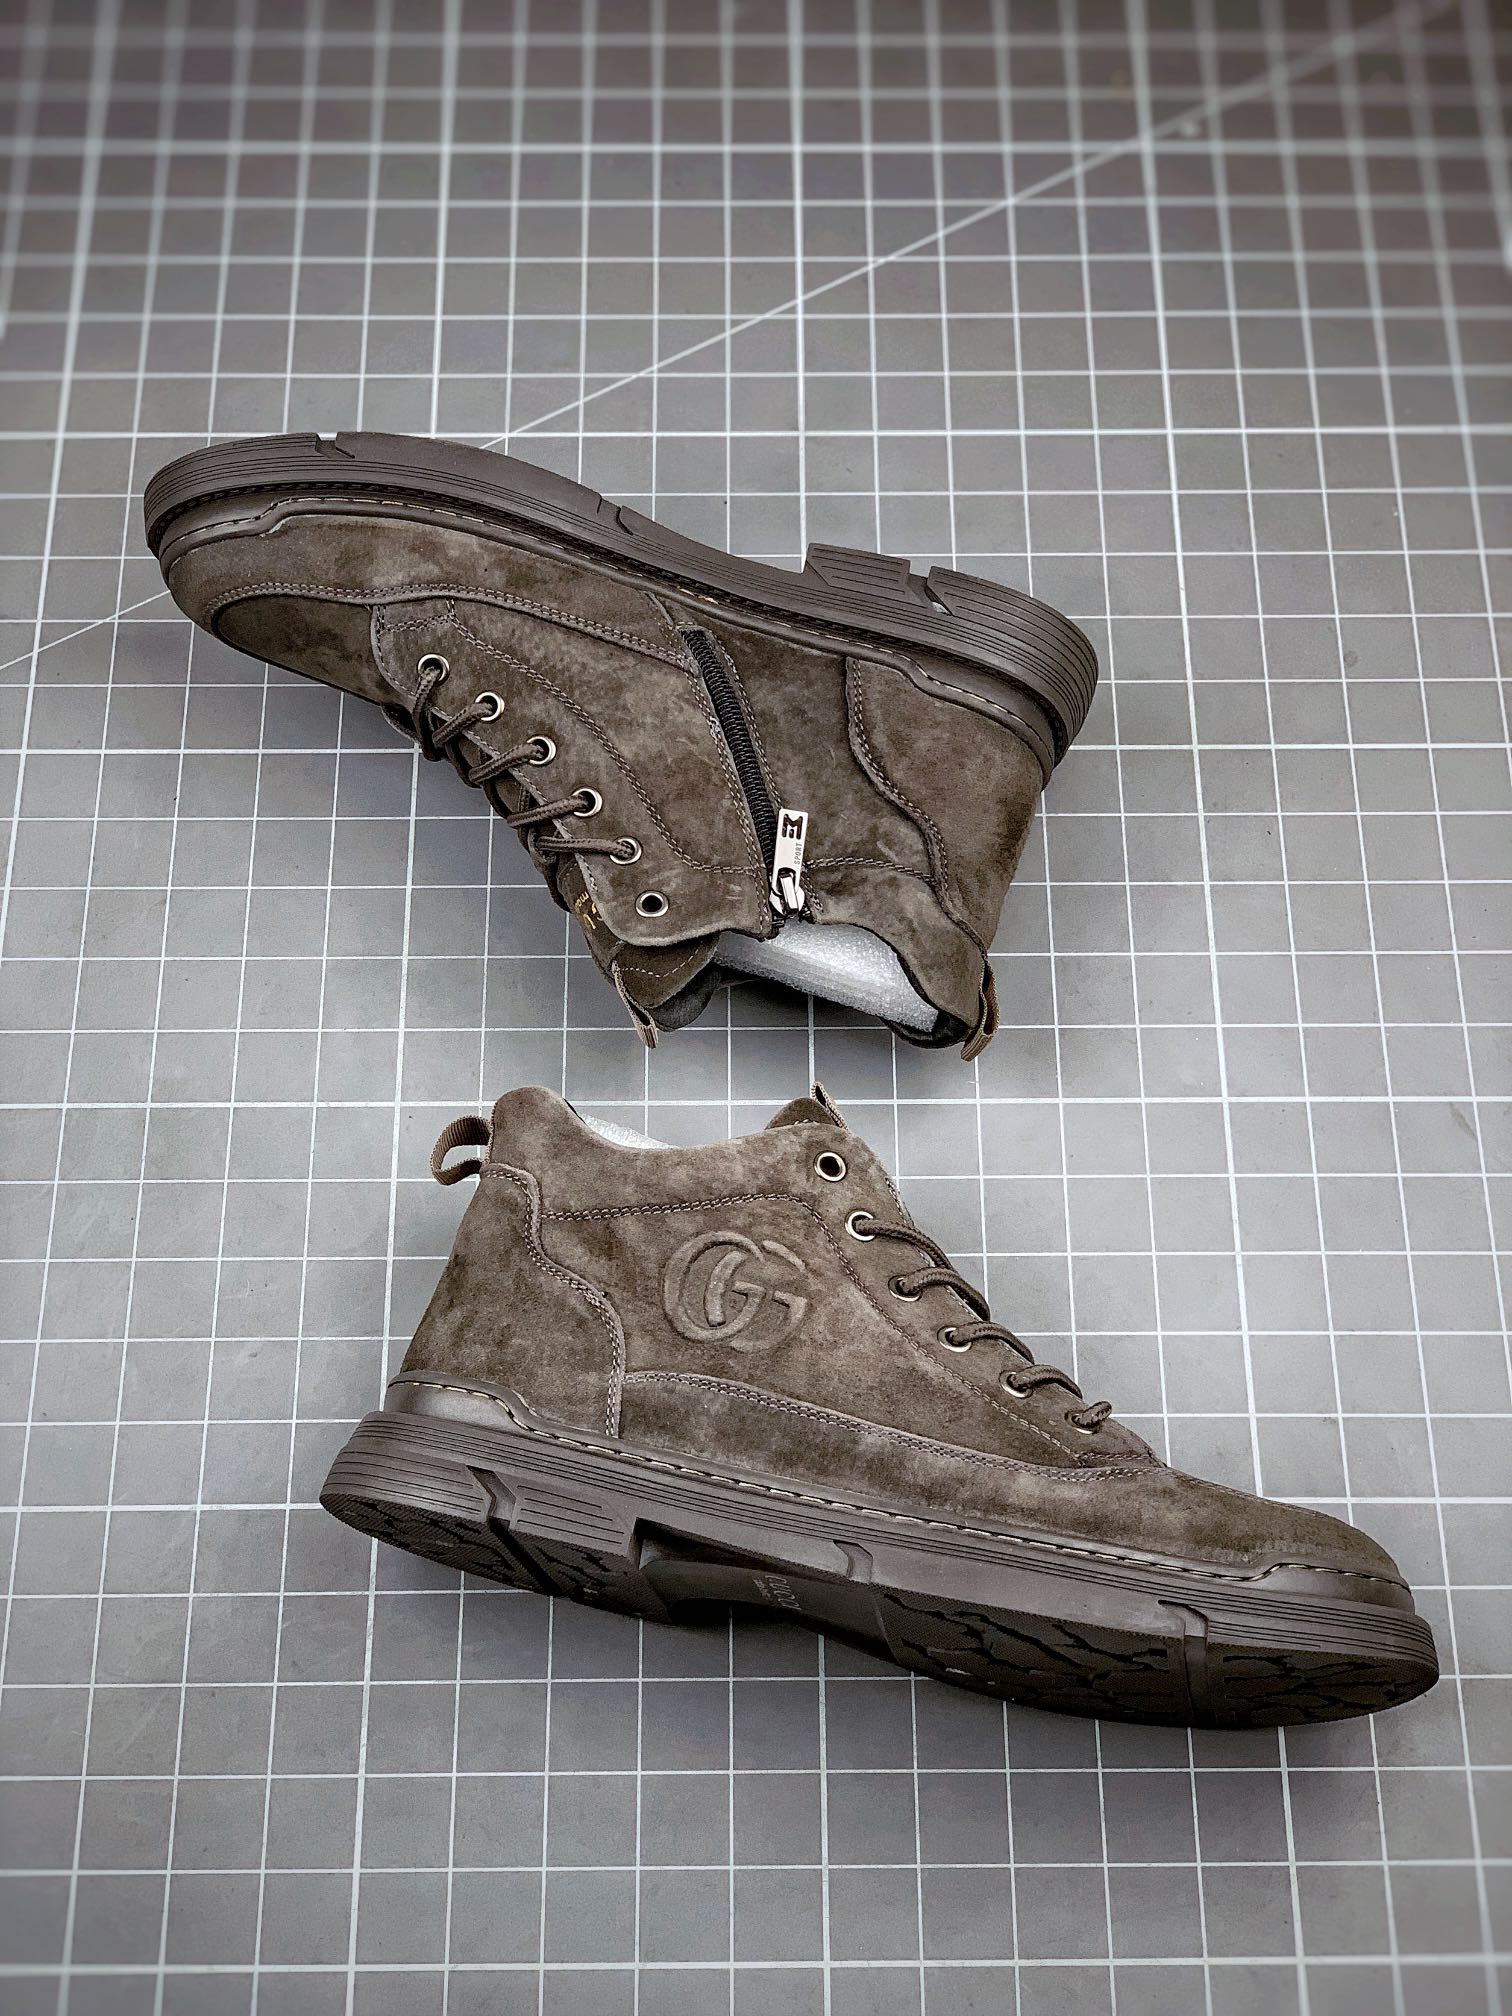 Gucci ankle boots and hiking shoes produced by Guangdong Dachang